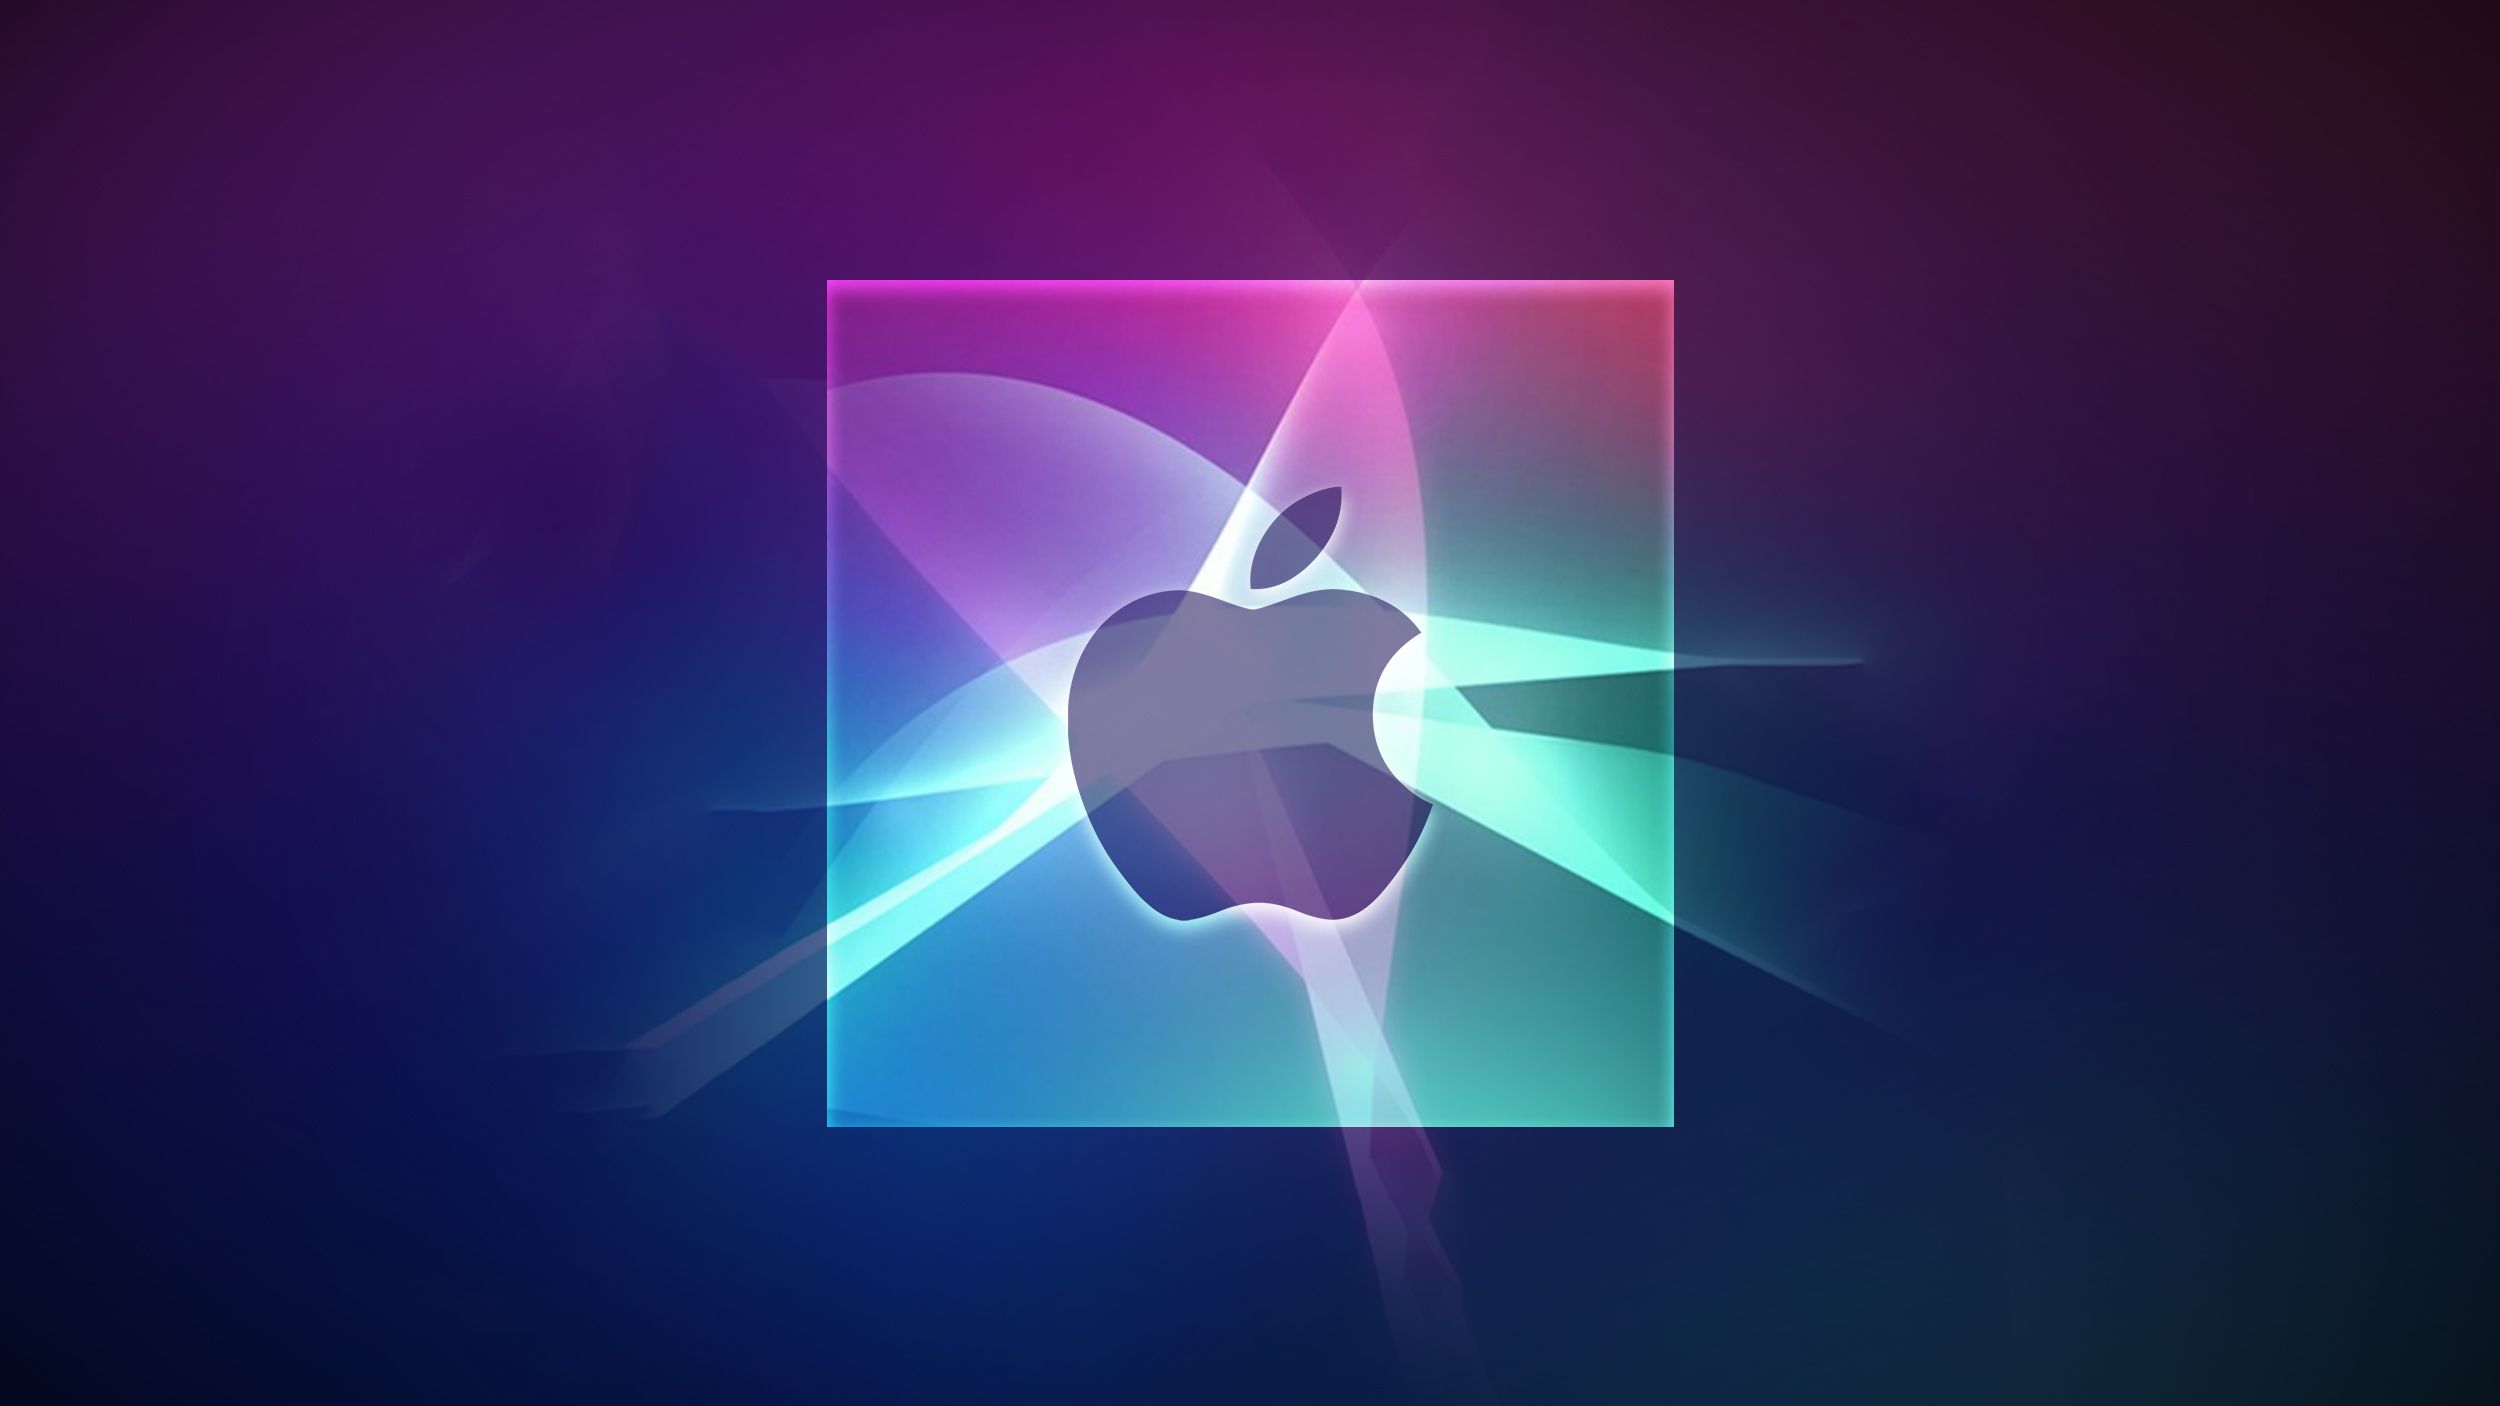 Apple is said to be developing its own AI server processor using TSMC's 3nm process, targeting mass production by the second half of 2025. 
According